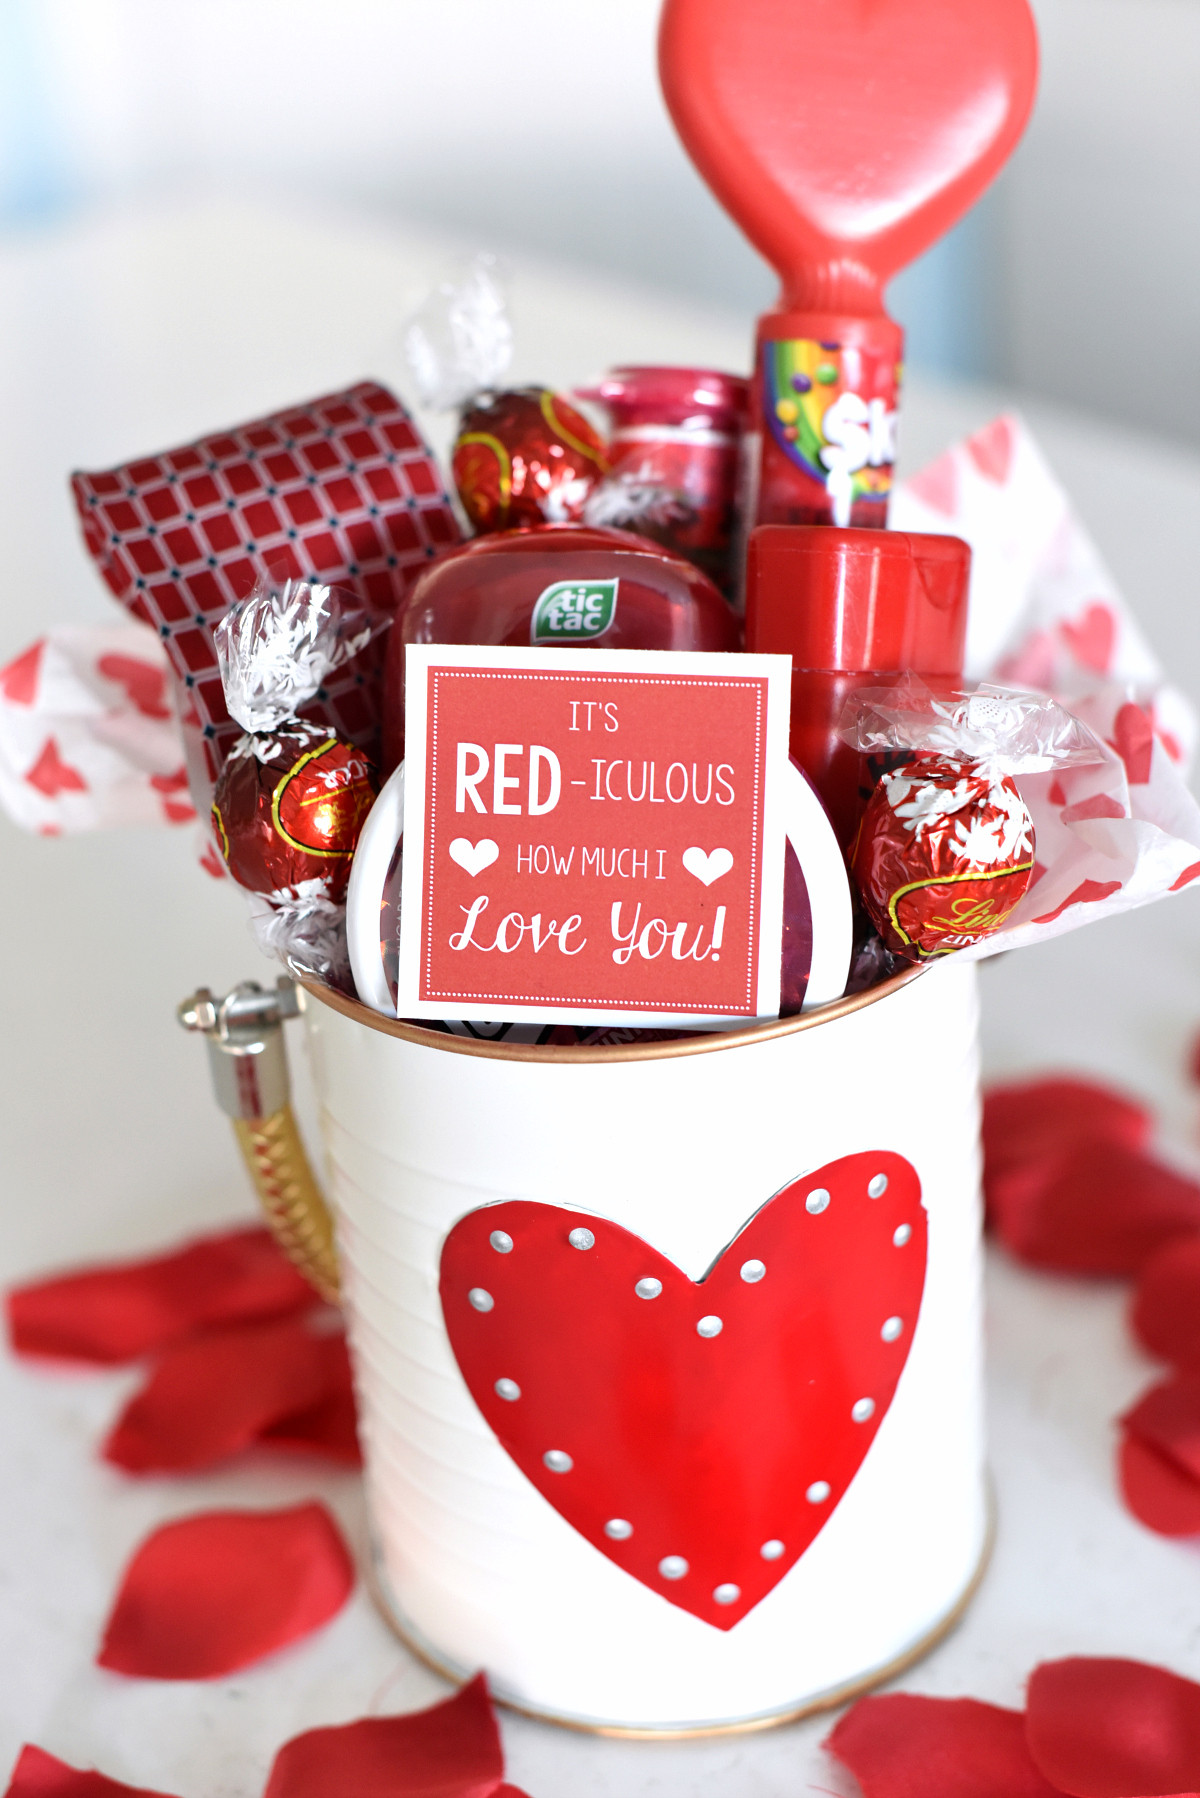 Gift Ideas For Valentines
 25 DIY Valentine s Day Gift Ideas Teens Will Love